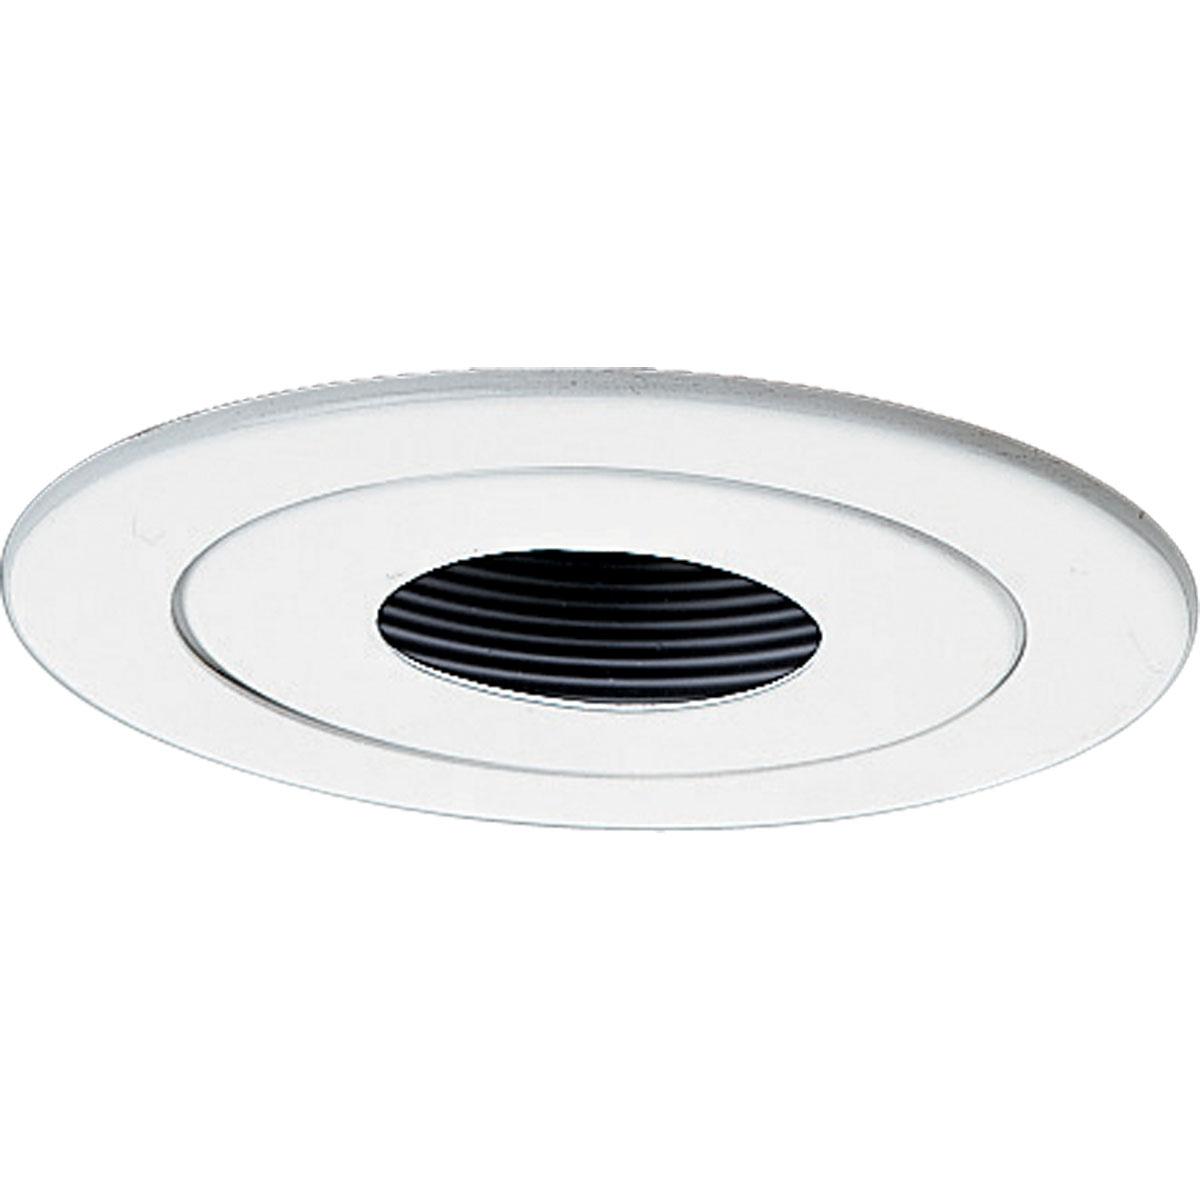 Hubbell P8042-28 4" Pinhole Spot trim in a White finish with bright white powdered painted metal flange and internal black baffle. 360 positioning, tilt 20. 5" outside diameter.  ; White finish. ; Bright white powdered painted metal flange. ; No light leaks around trim fl